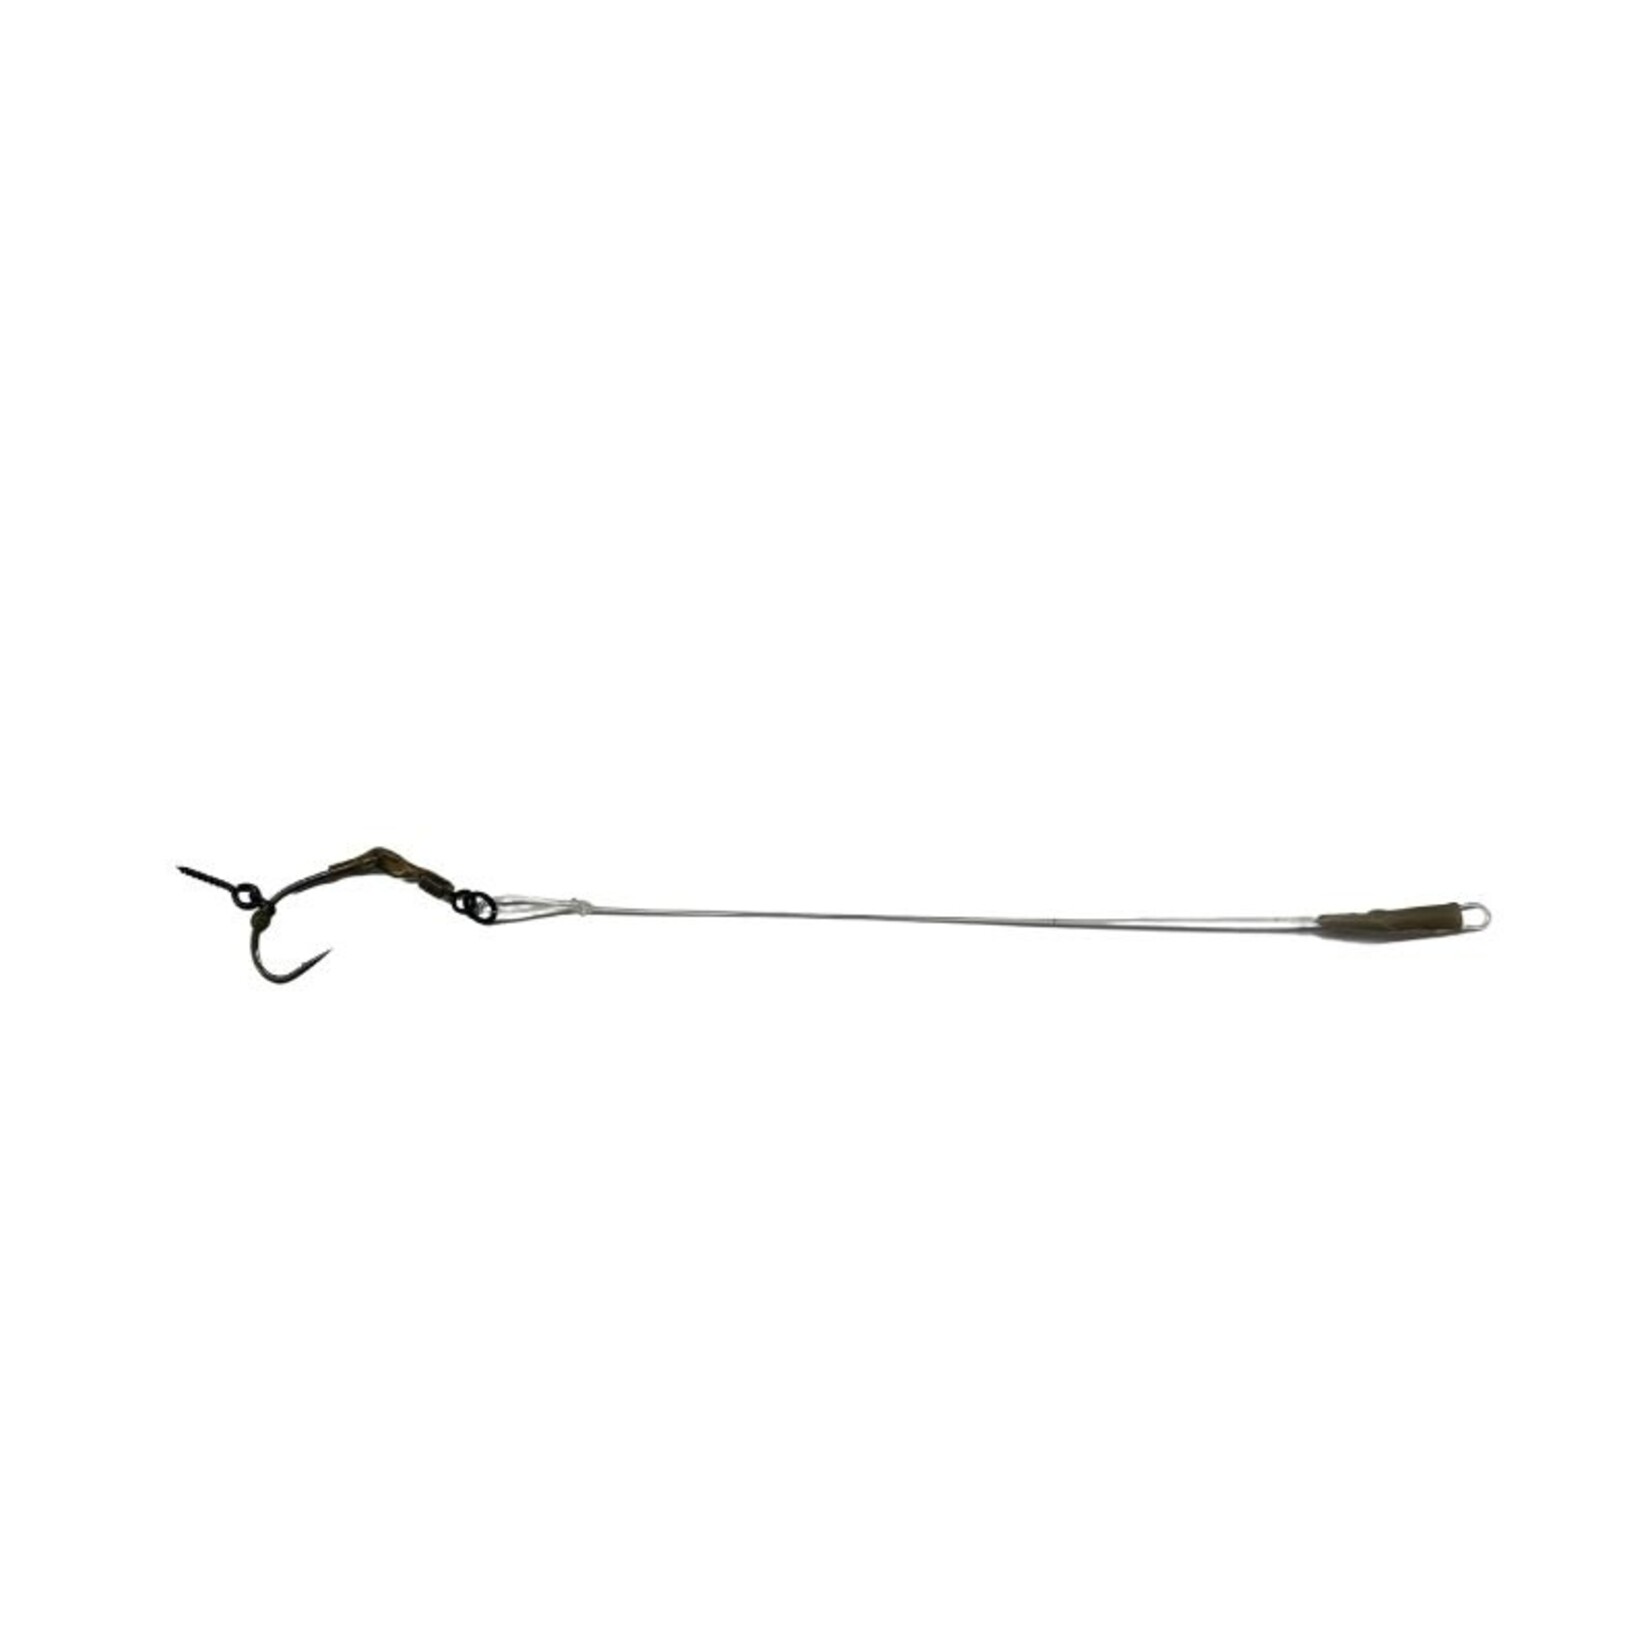 Baitsolutions Stiff Ronnie Rig size 4 - 1 pc